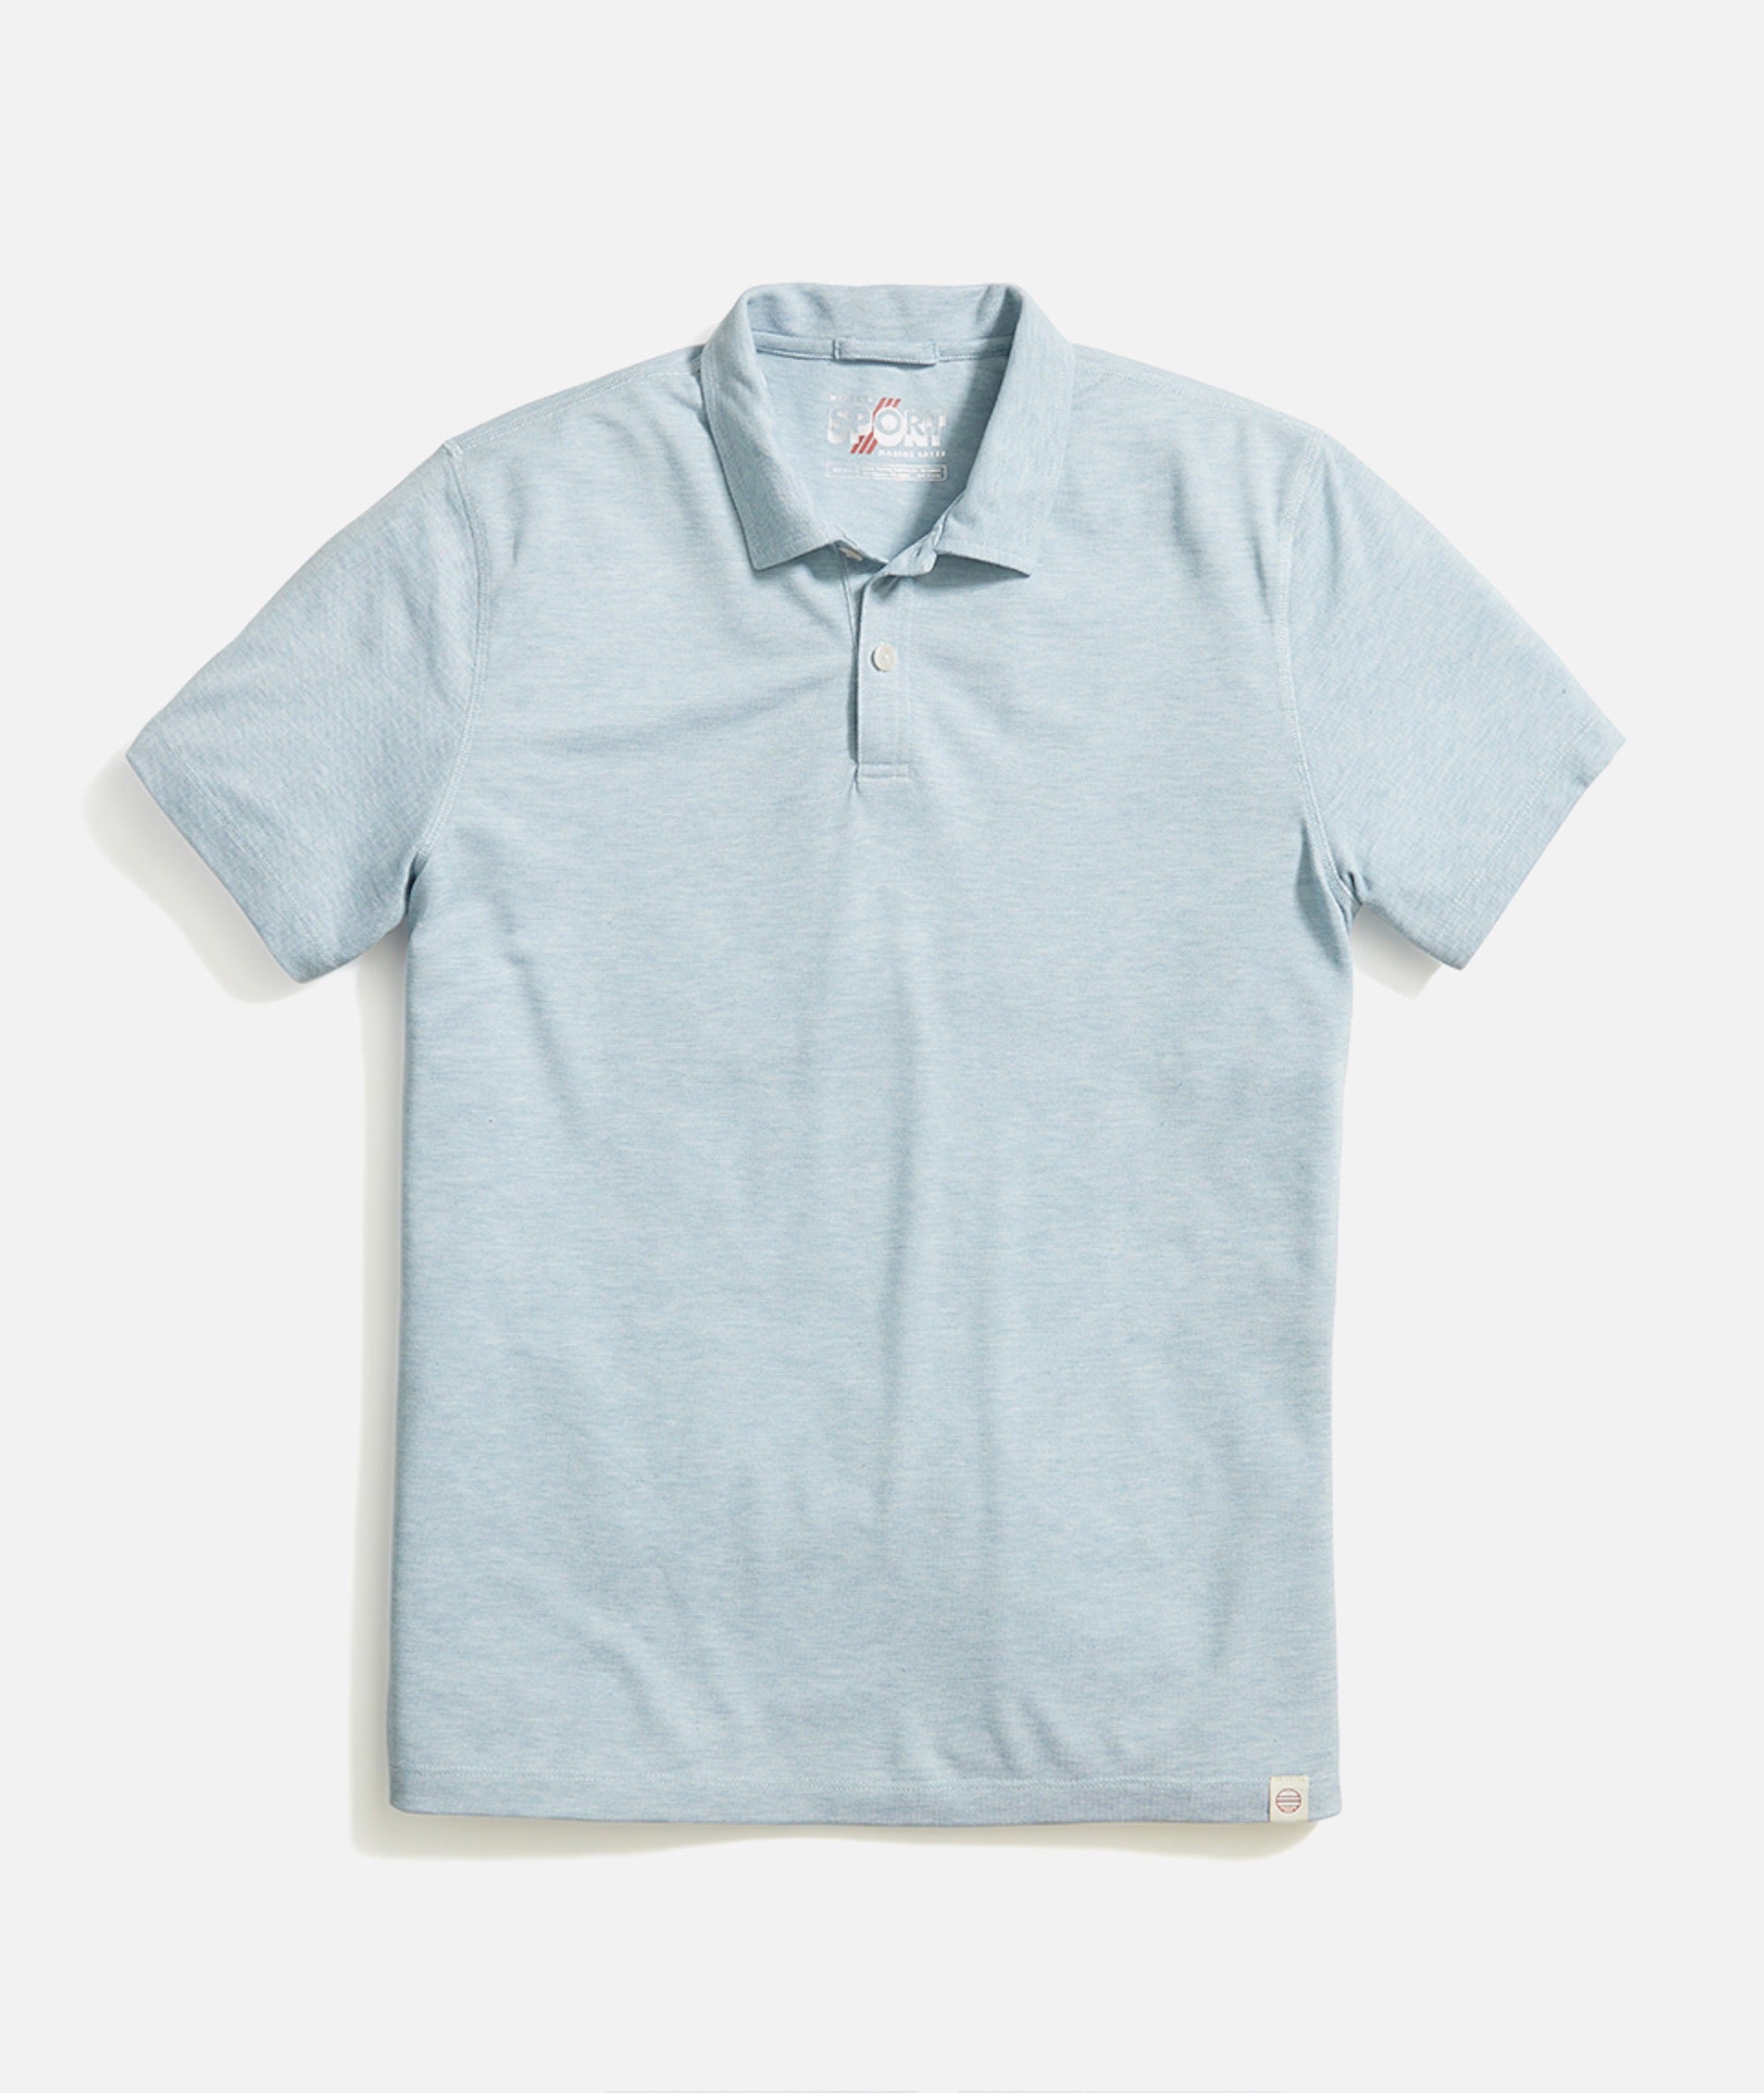 Cool Cotton – Heather Blue Pique in Polo Marine China Layer